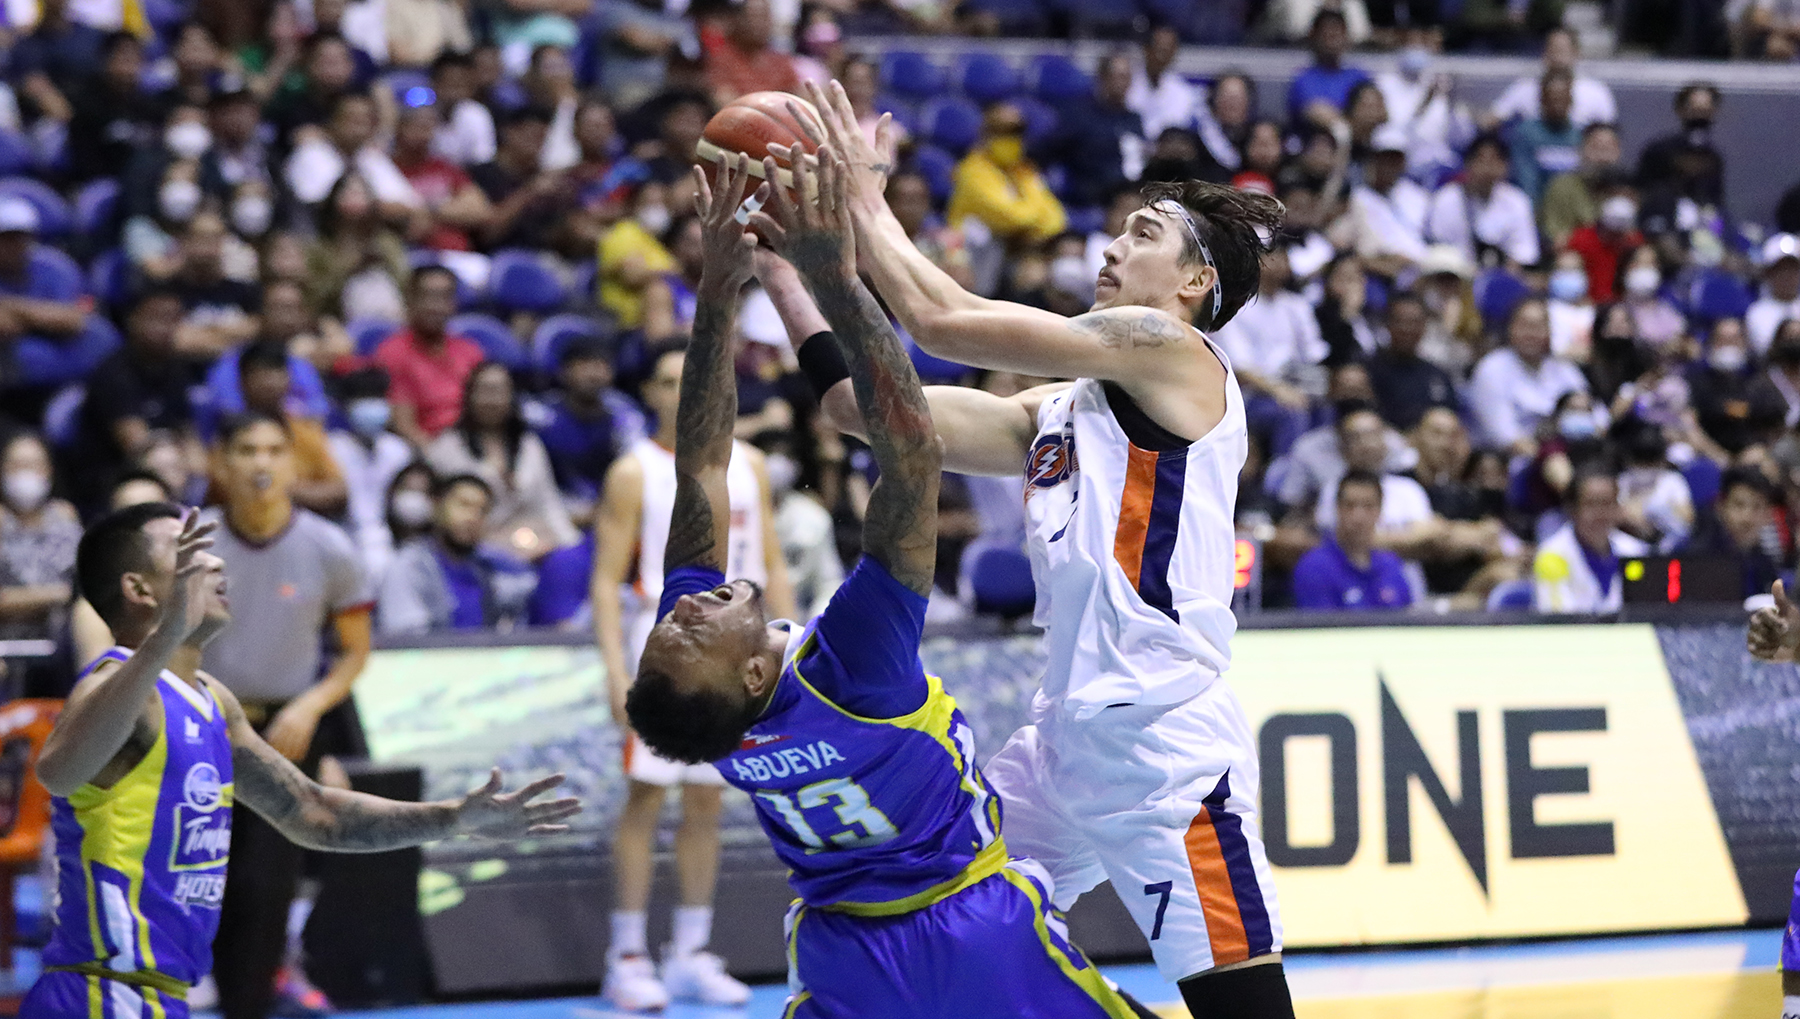 Meralco snaps Magnolia’s 4-game streak for back-to-back wins